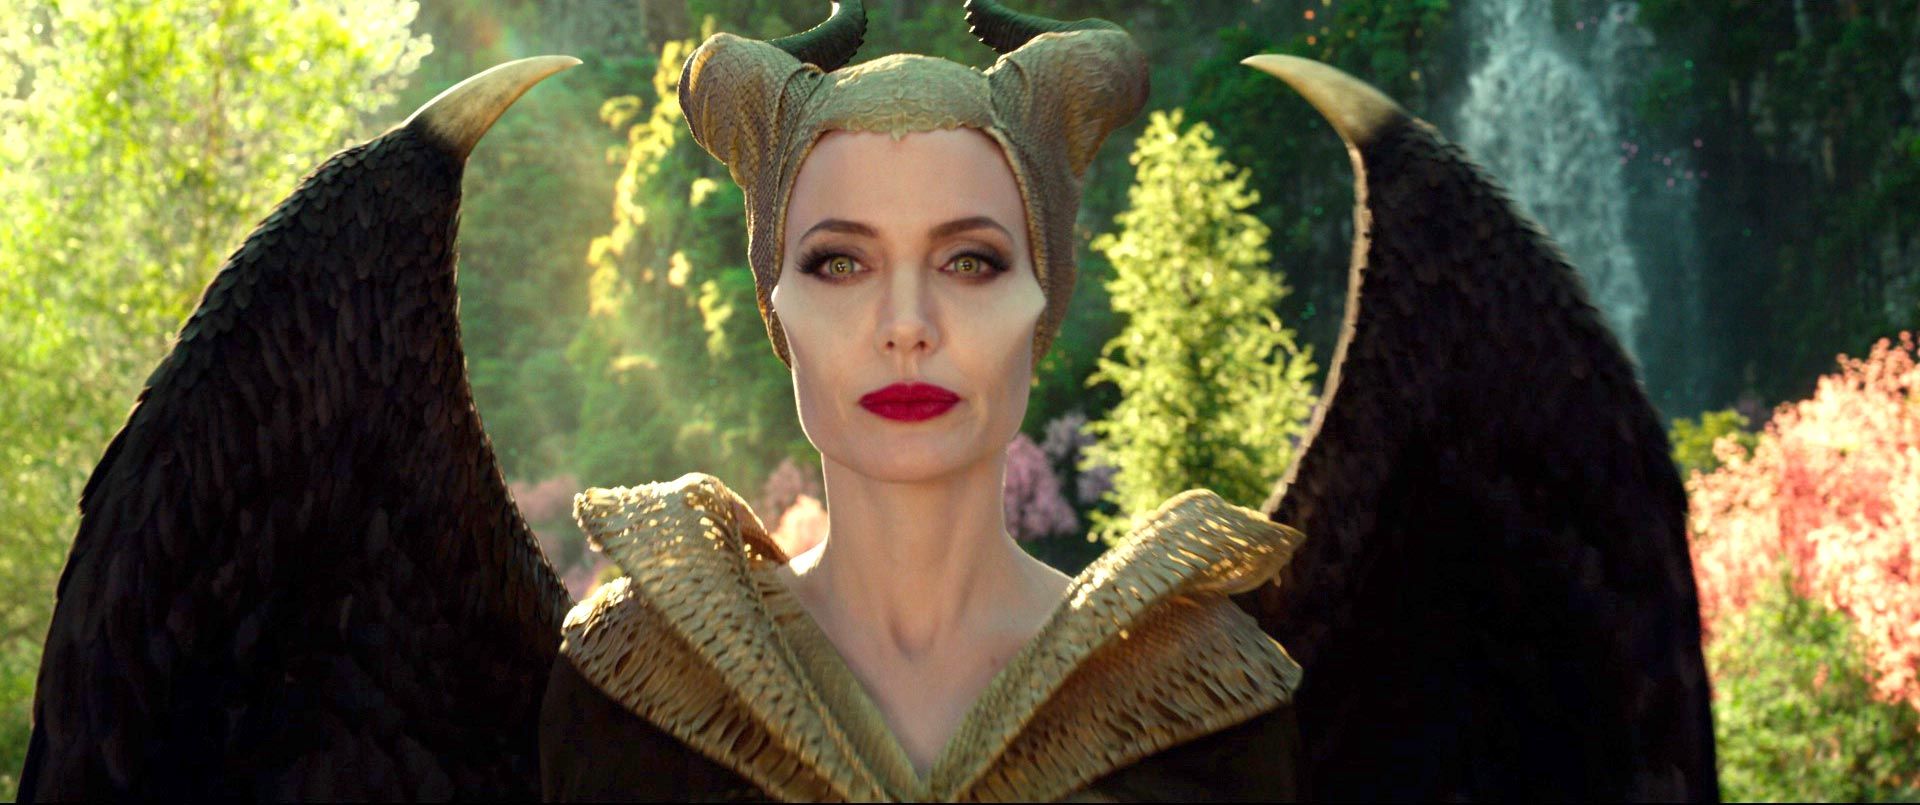 Lesson Learned from Maleficent. Maleficent is one of the many